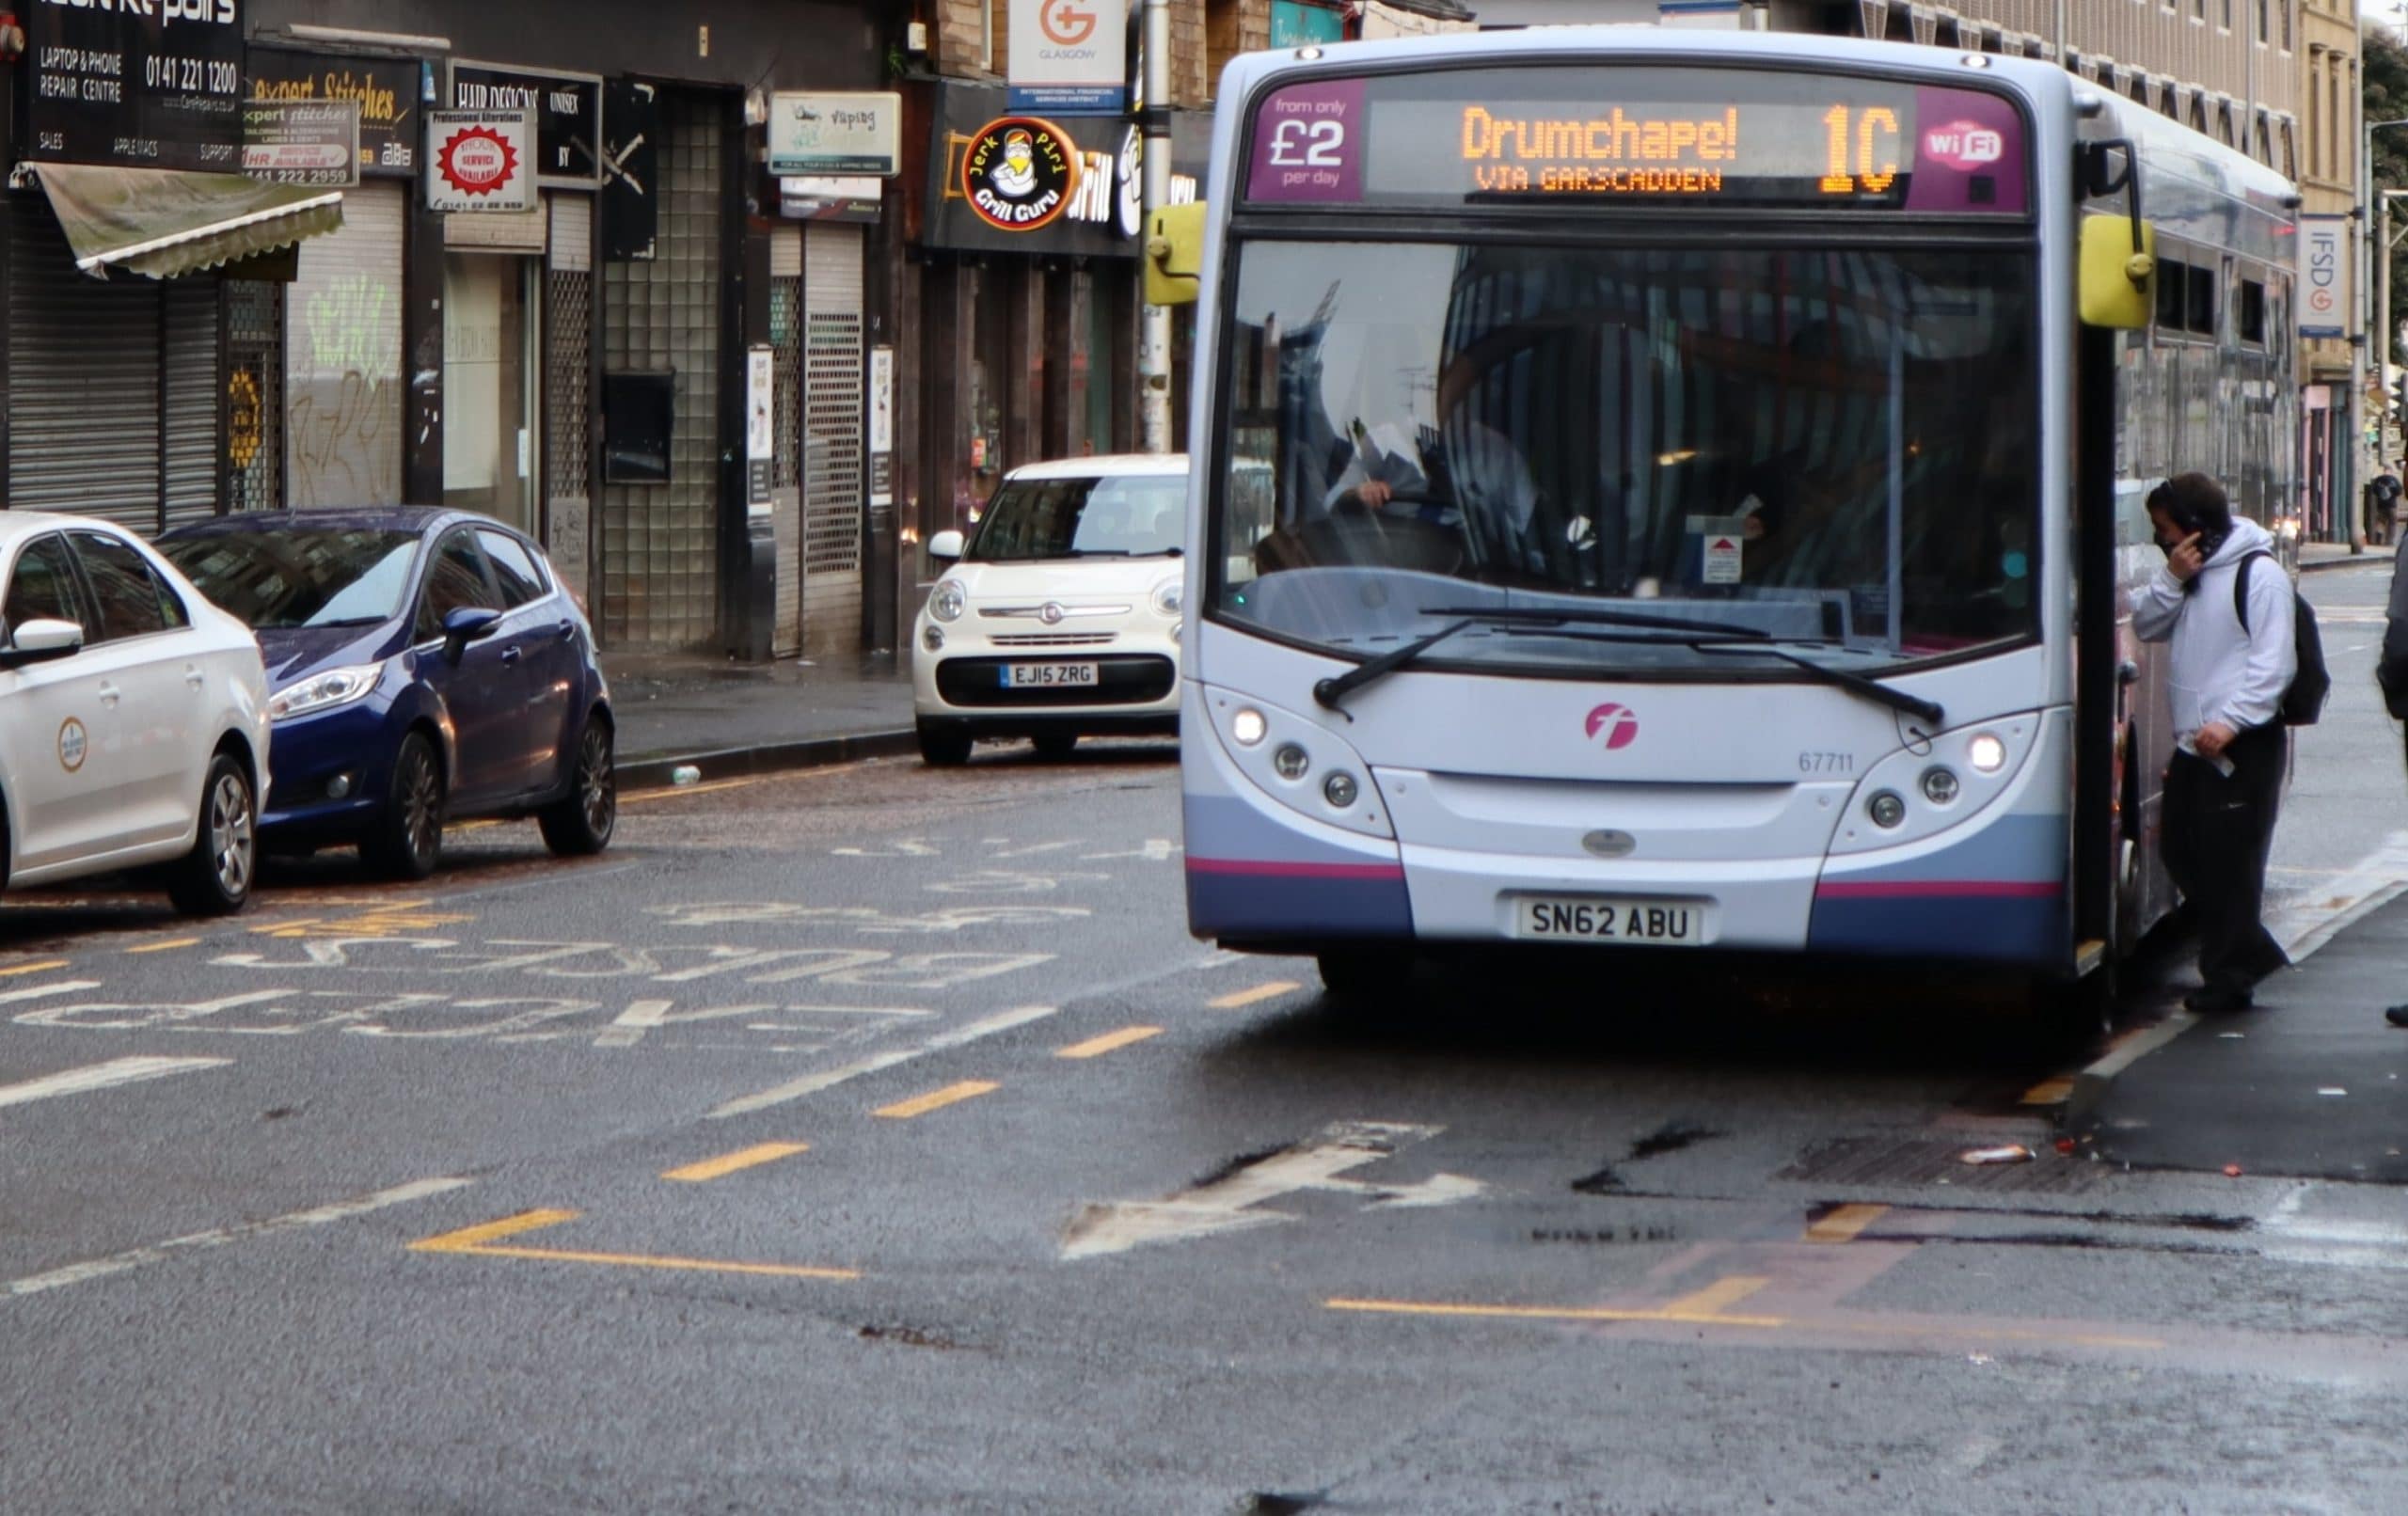 BEAR4 retrofit scheme launched for coach and bus in Scotland